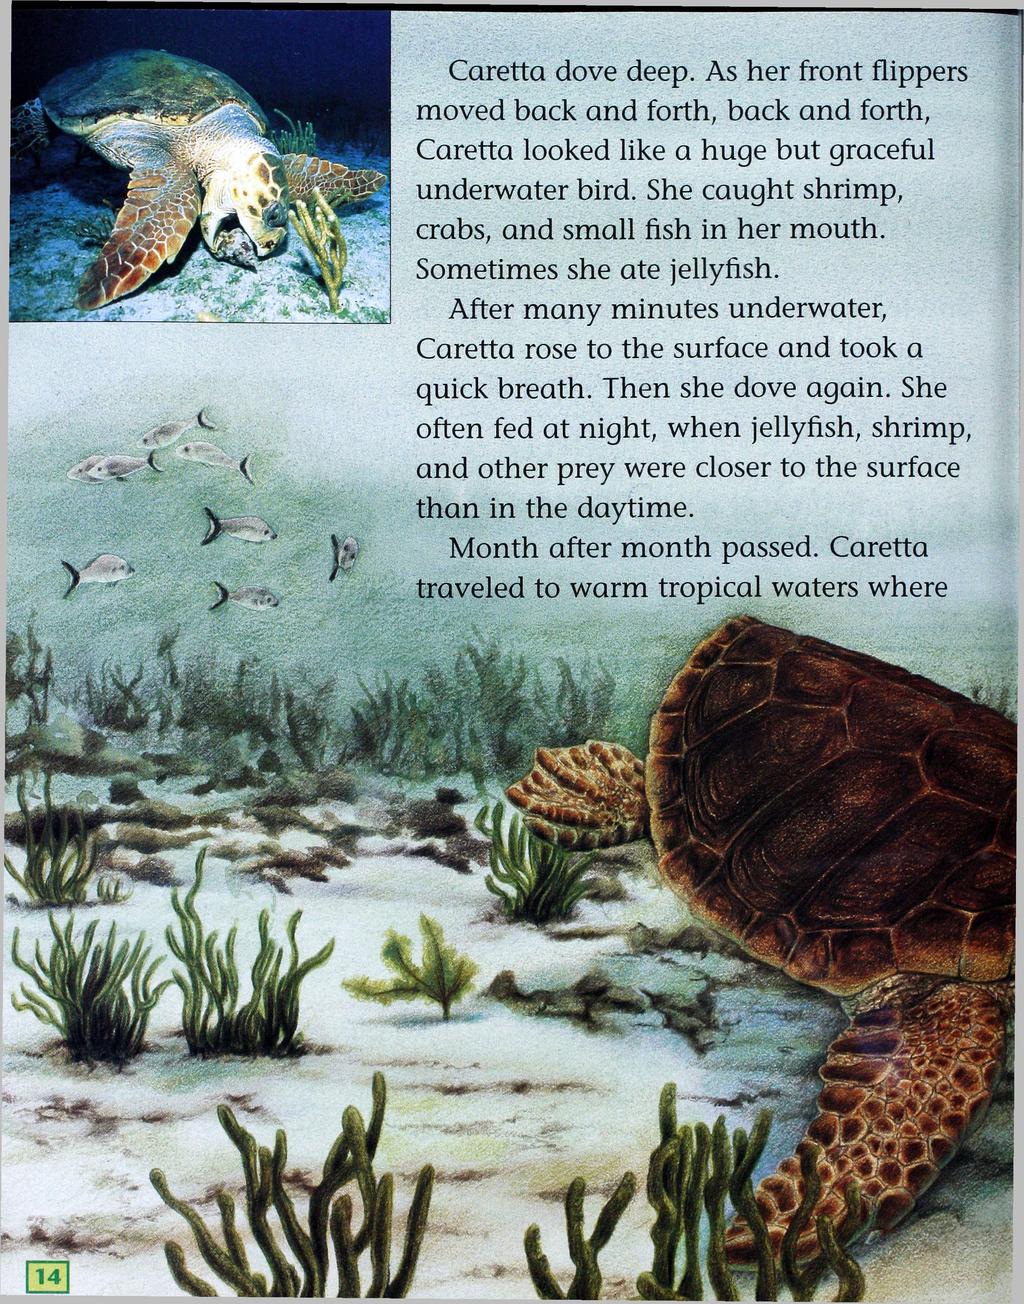 Caretta dove deep. As her front flippers moved back and forth, back and forth, Caretta looked like a huge but graceful underwater bird. She caught shrimp, crabs, and small fish in her mouth.